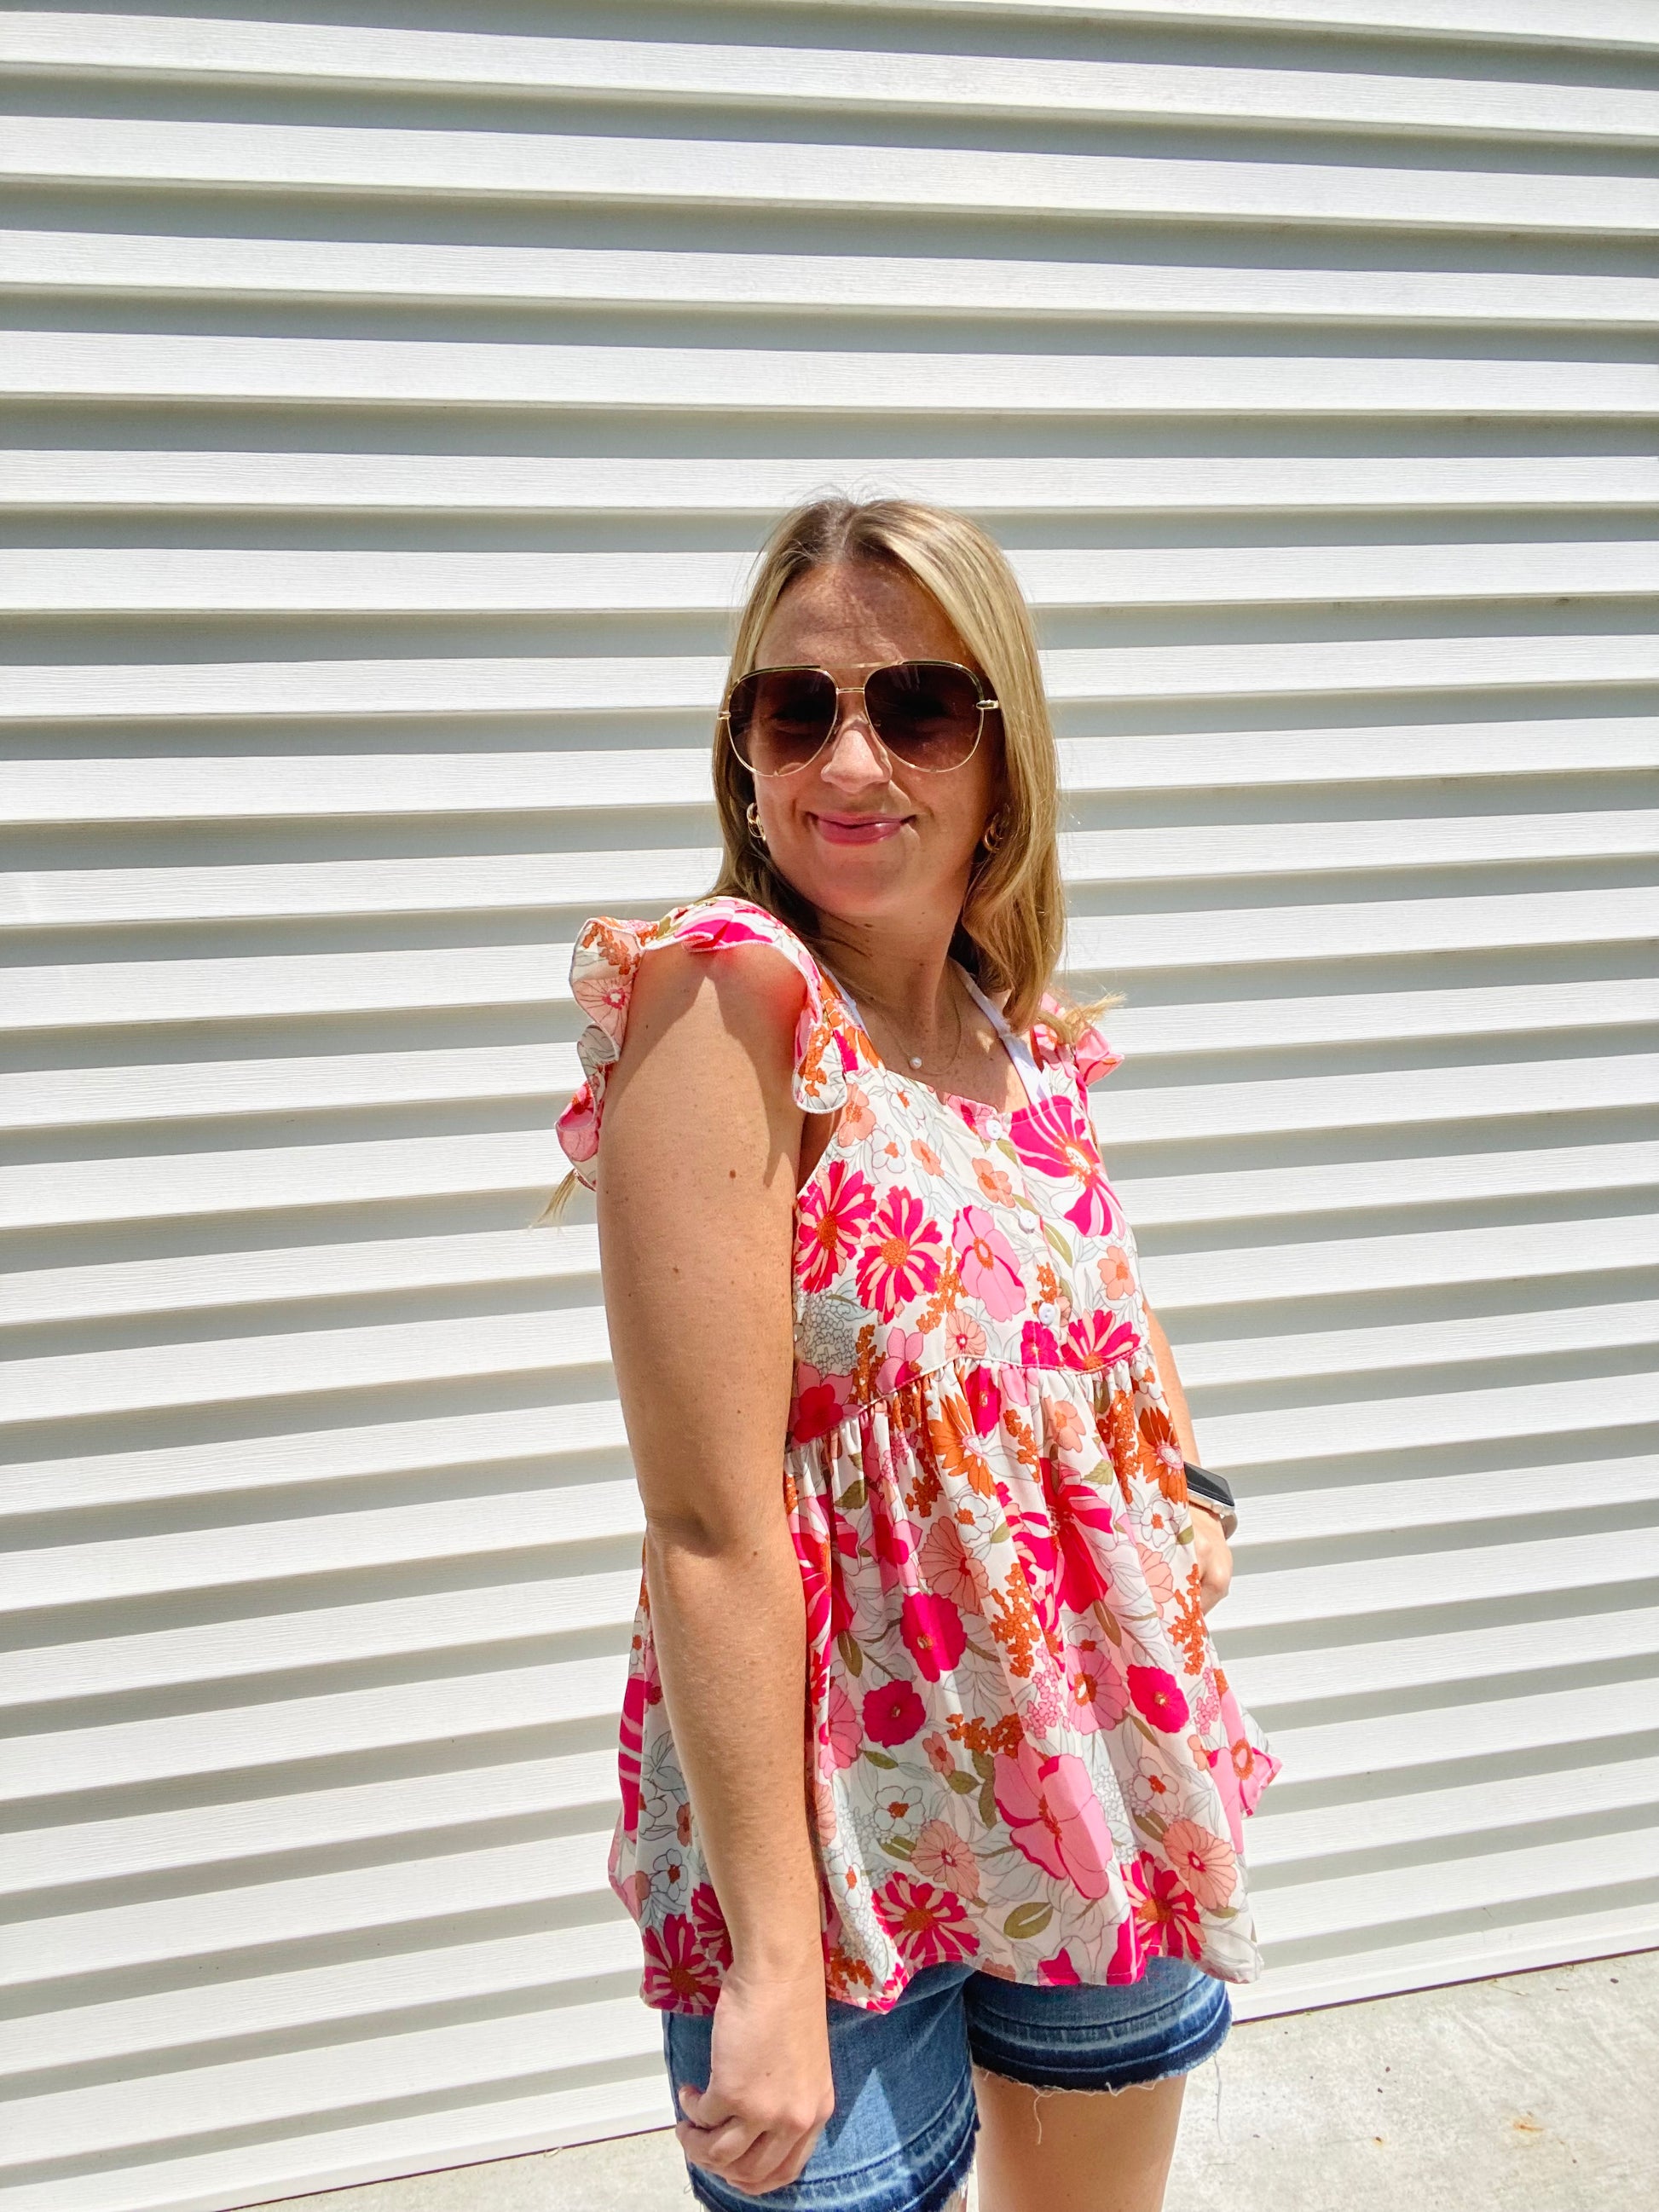 This Shades of Pink Floral Top is the perfect addition to your summer wardrobe. Its high neckline and flutter sleeve are perfect for sunny days, while the bright colors and peplum top add an extra touch of style. Accessorize to create a look that is all your own.